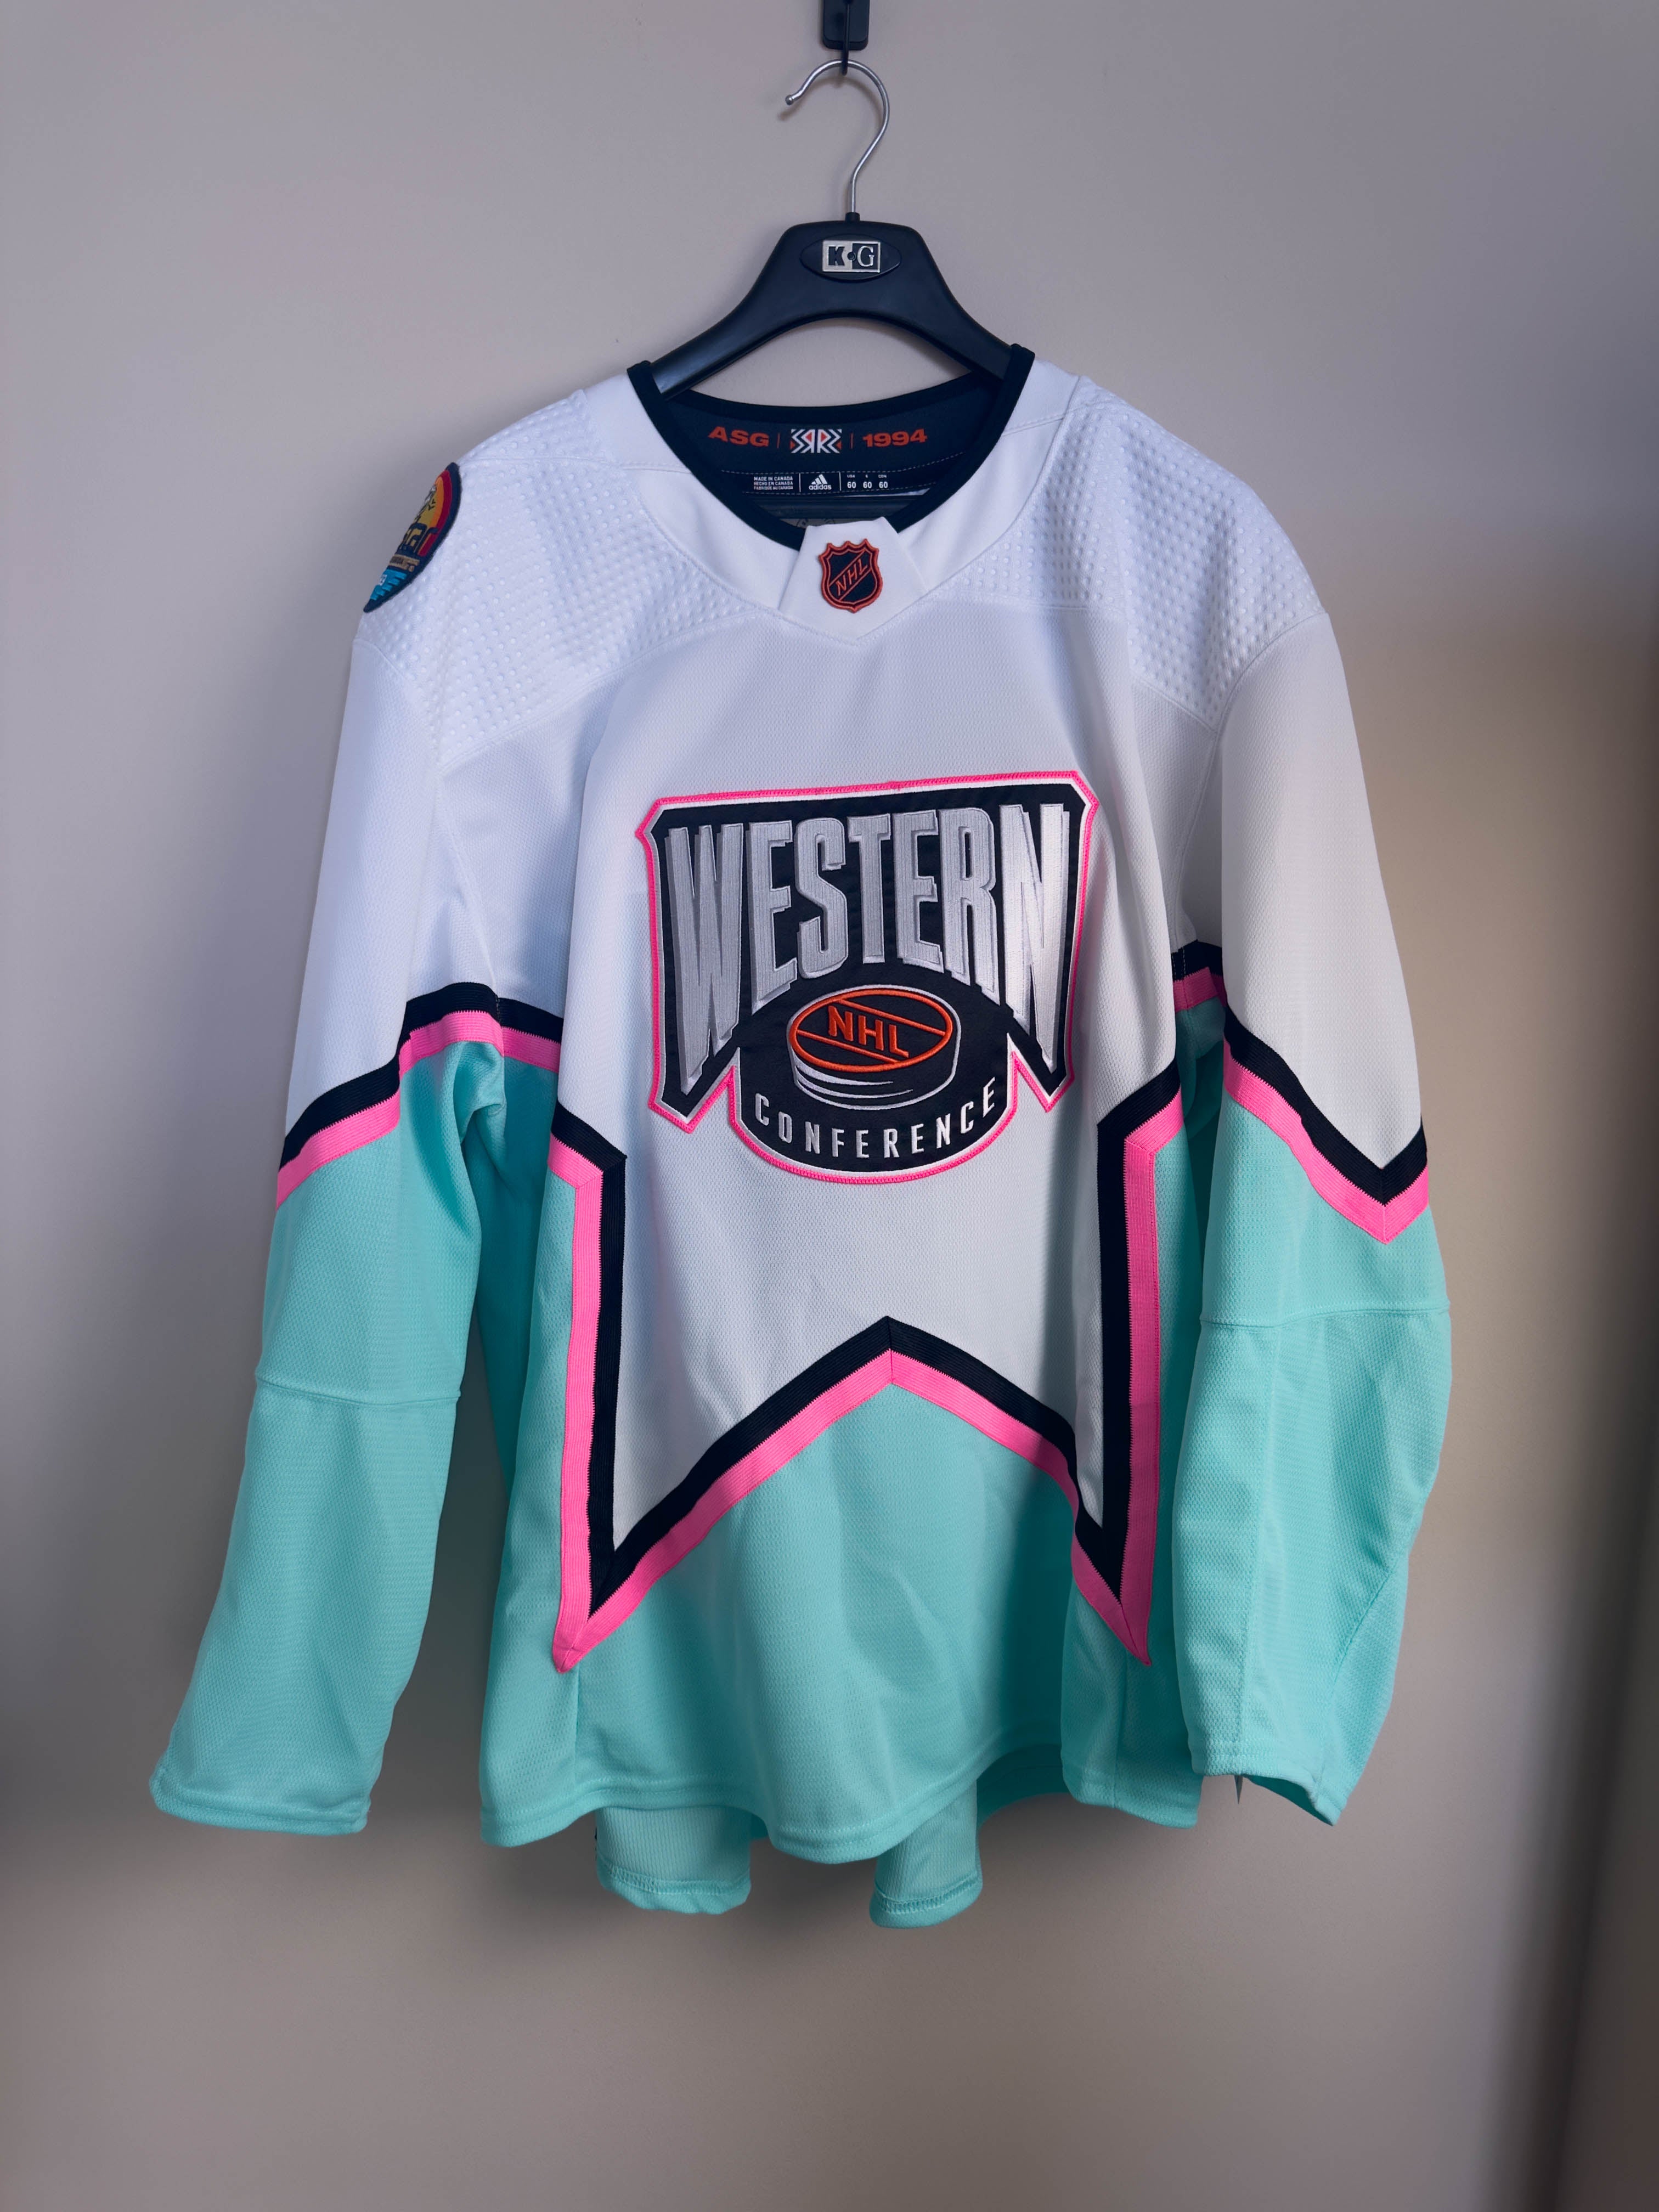 NHL All Star Merchandise, Collection, NHL All Star Merchandise Gear